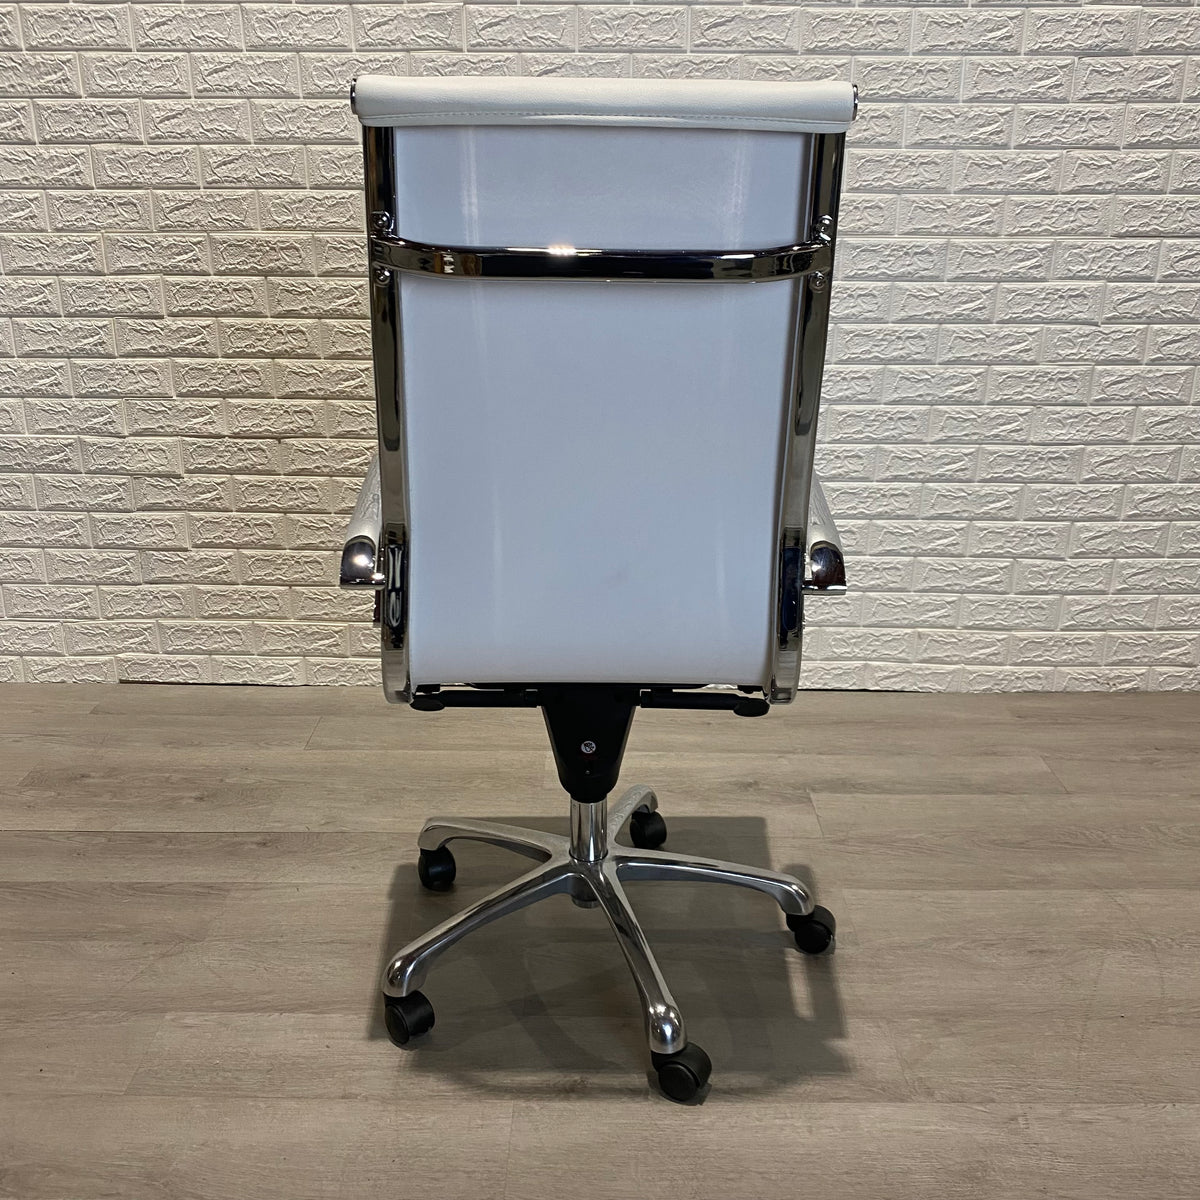 Pre Owned Executive/Conference Chair [ Whitley ] - Duckys Office Furniture